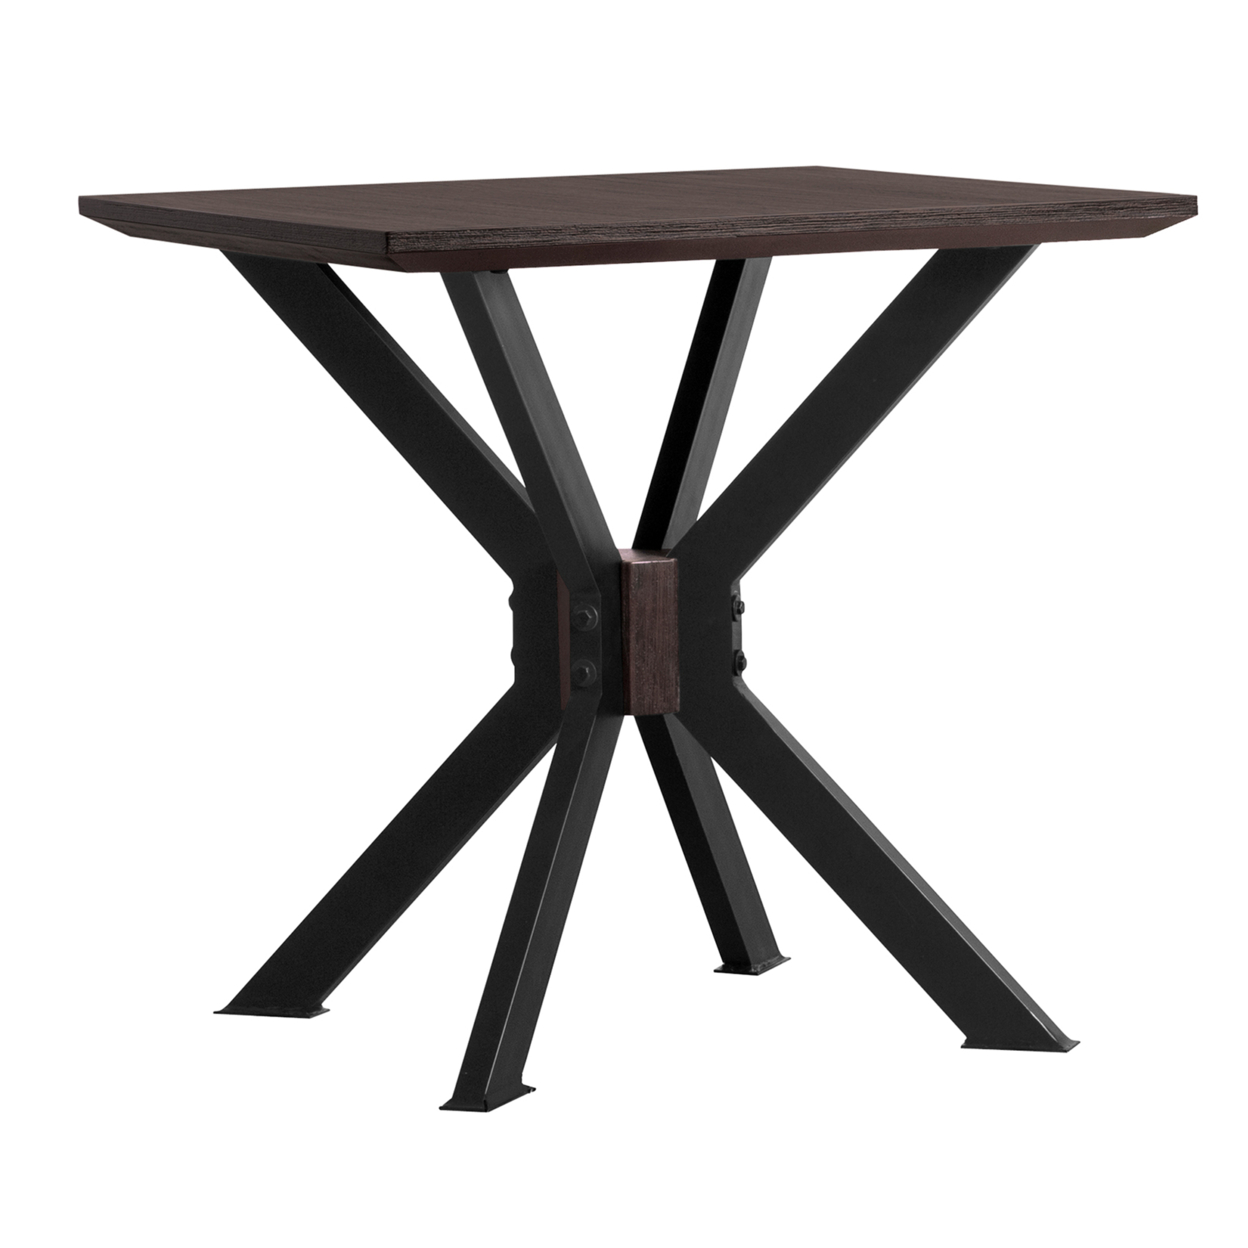 Wooden End Table With Intersected Double X Shaped Legs, Brown And Black- Saltoro Sherpi